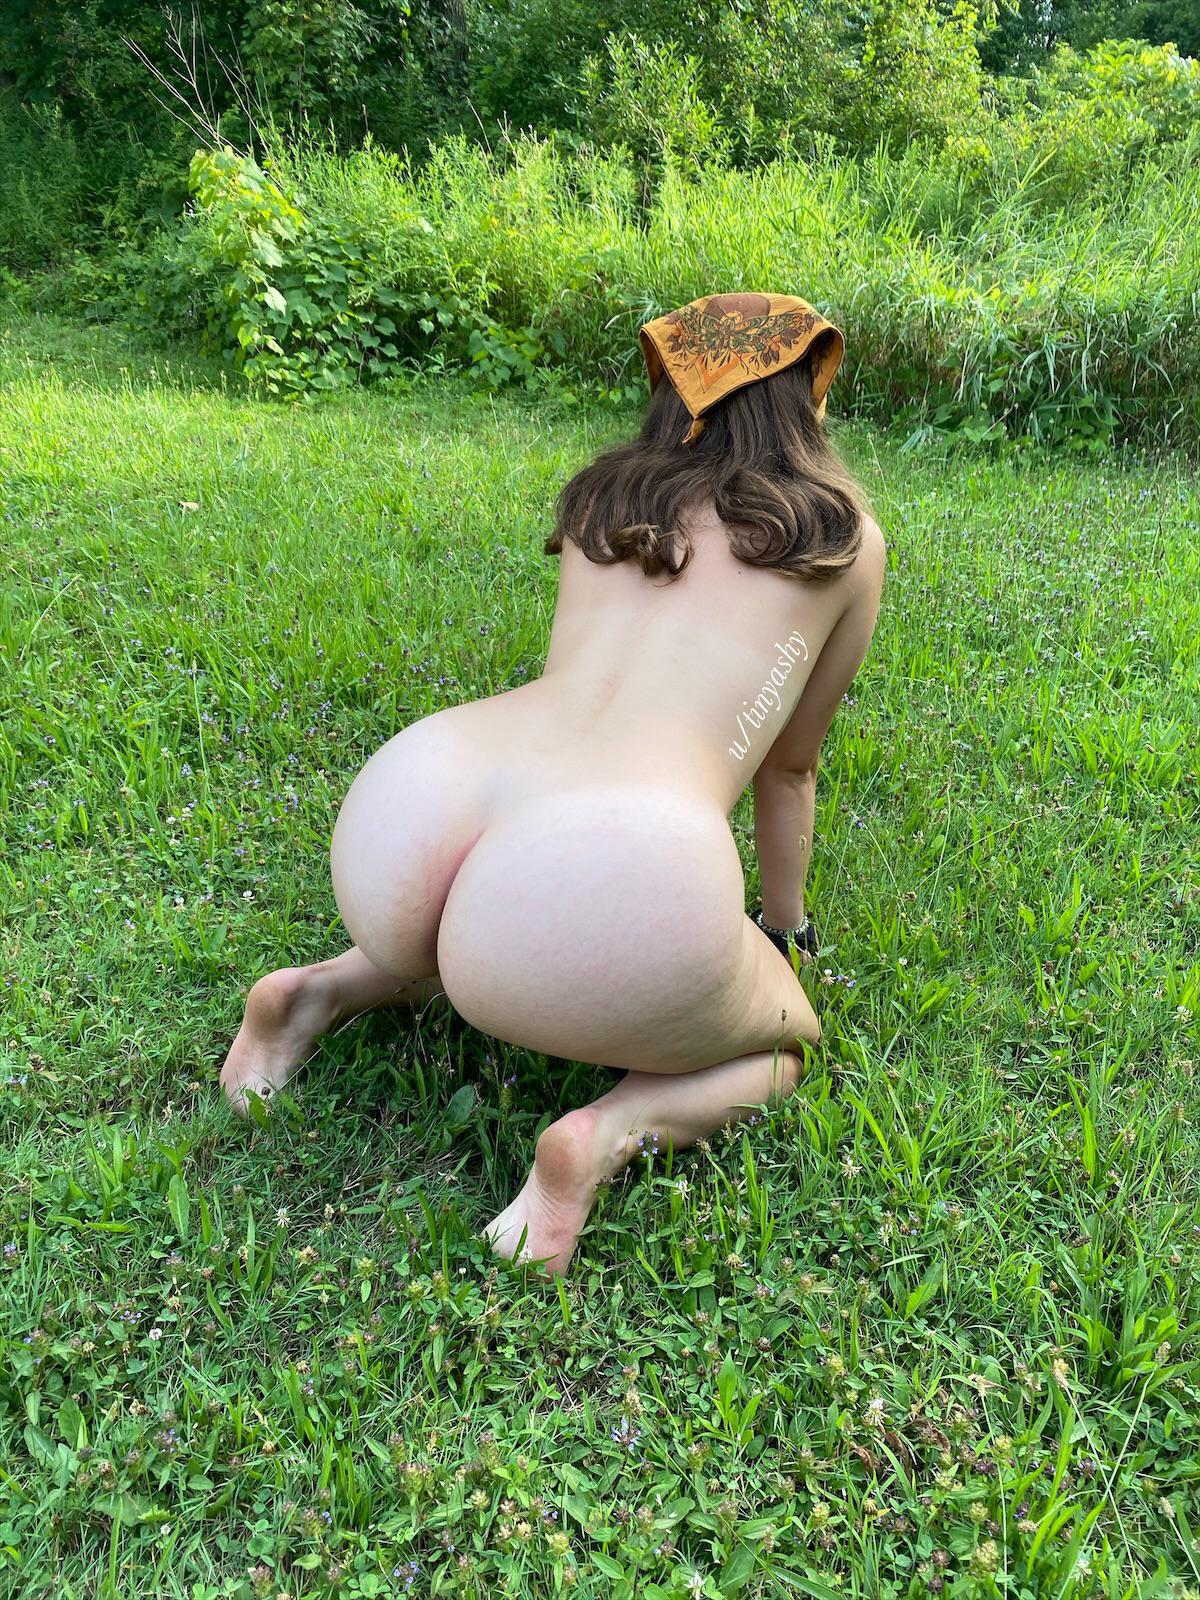 Dog park Oh I thought you said PAWG park oc